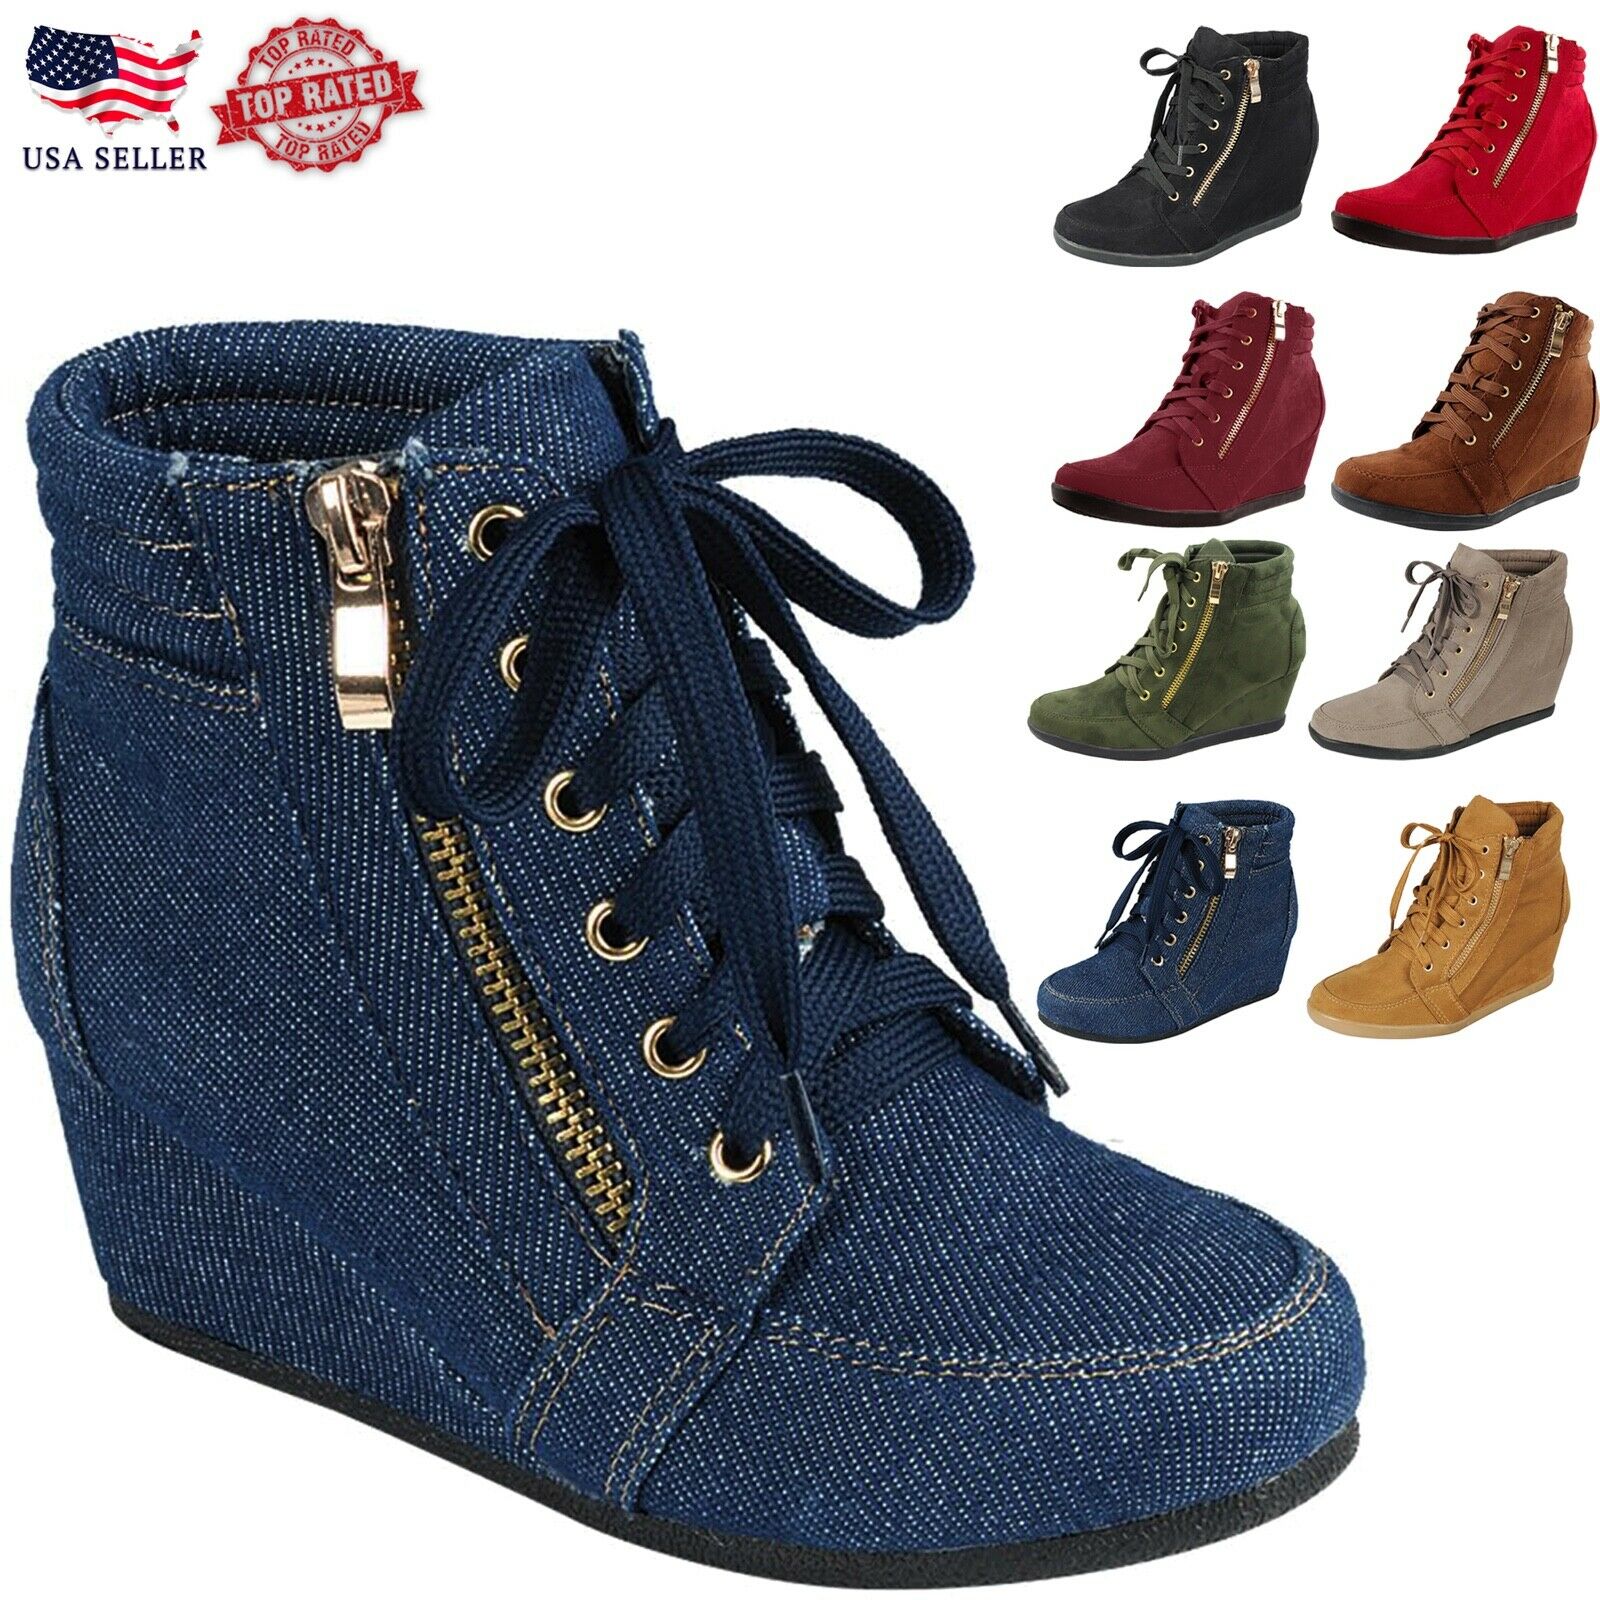 New Women's Sneakers High Top Zipper Accent Lace Up Wedge Heel Ankle Bootie Shoe